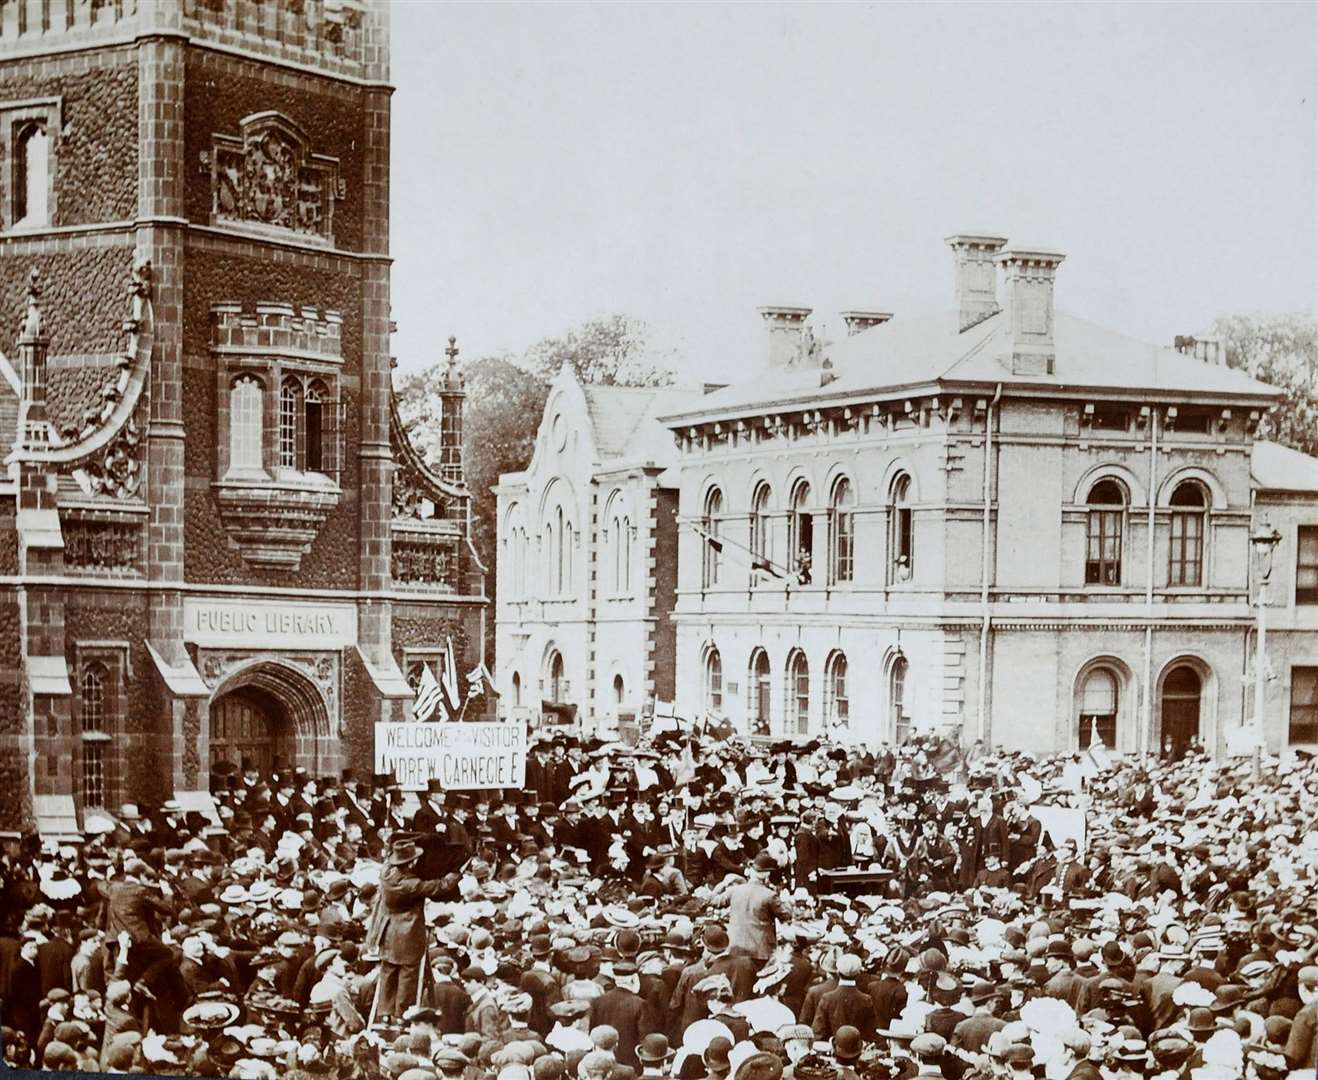 A photograph showing the official opening of Lynn’s library by Andrew Carnegie in 1905